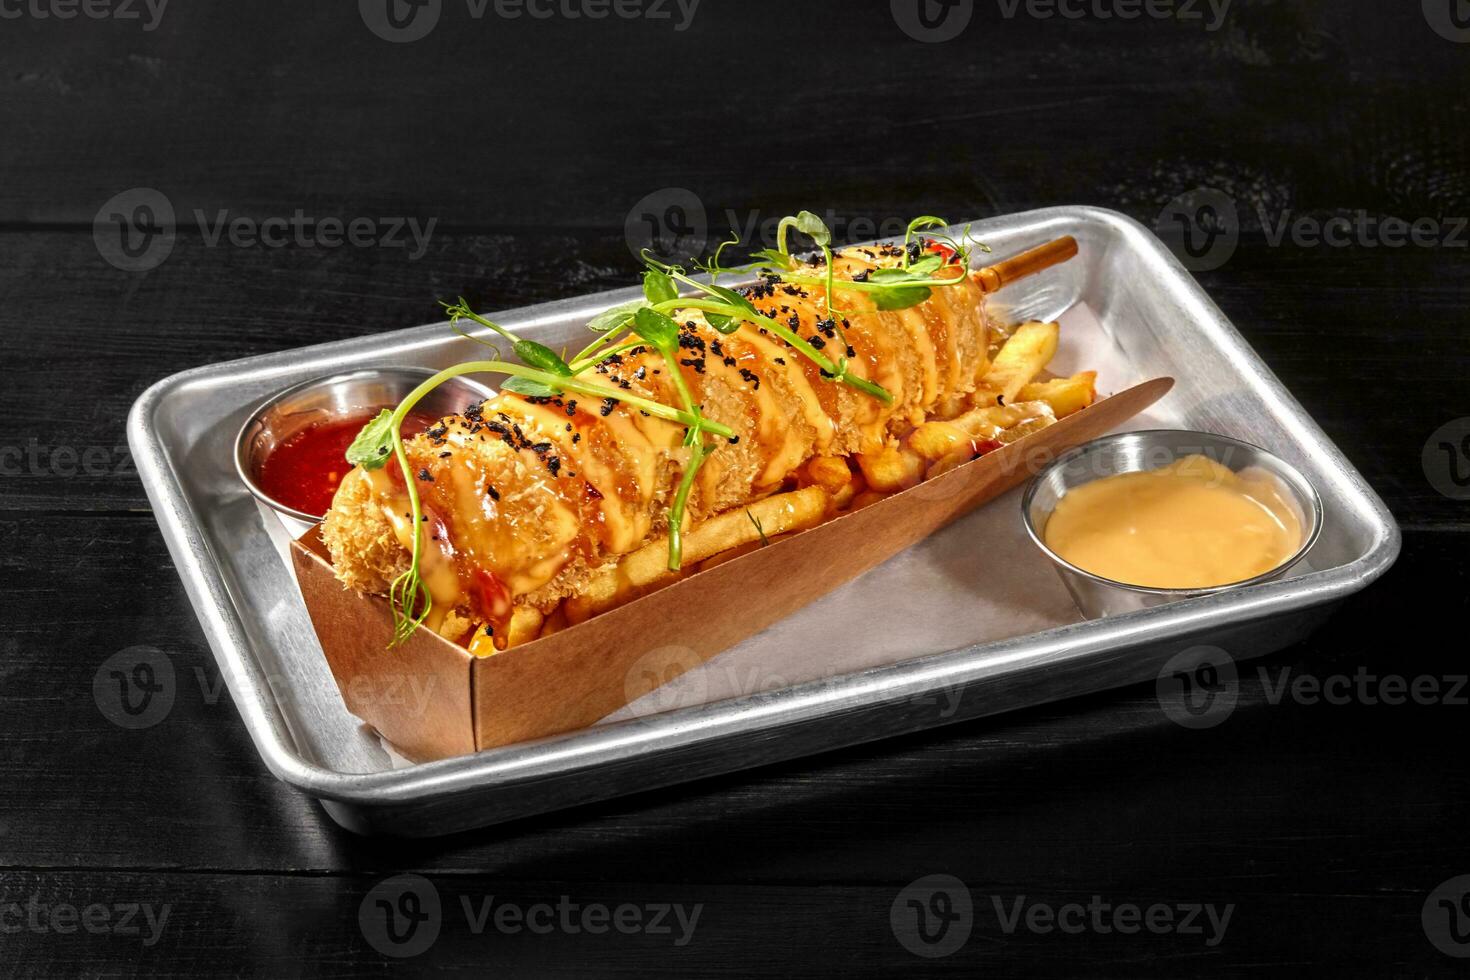 Classic sausage corn dog with french fries, sweet chili and cheddar sauces photo